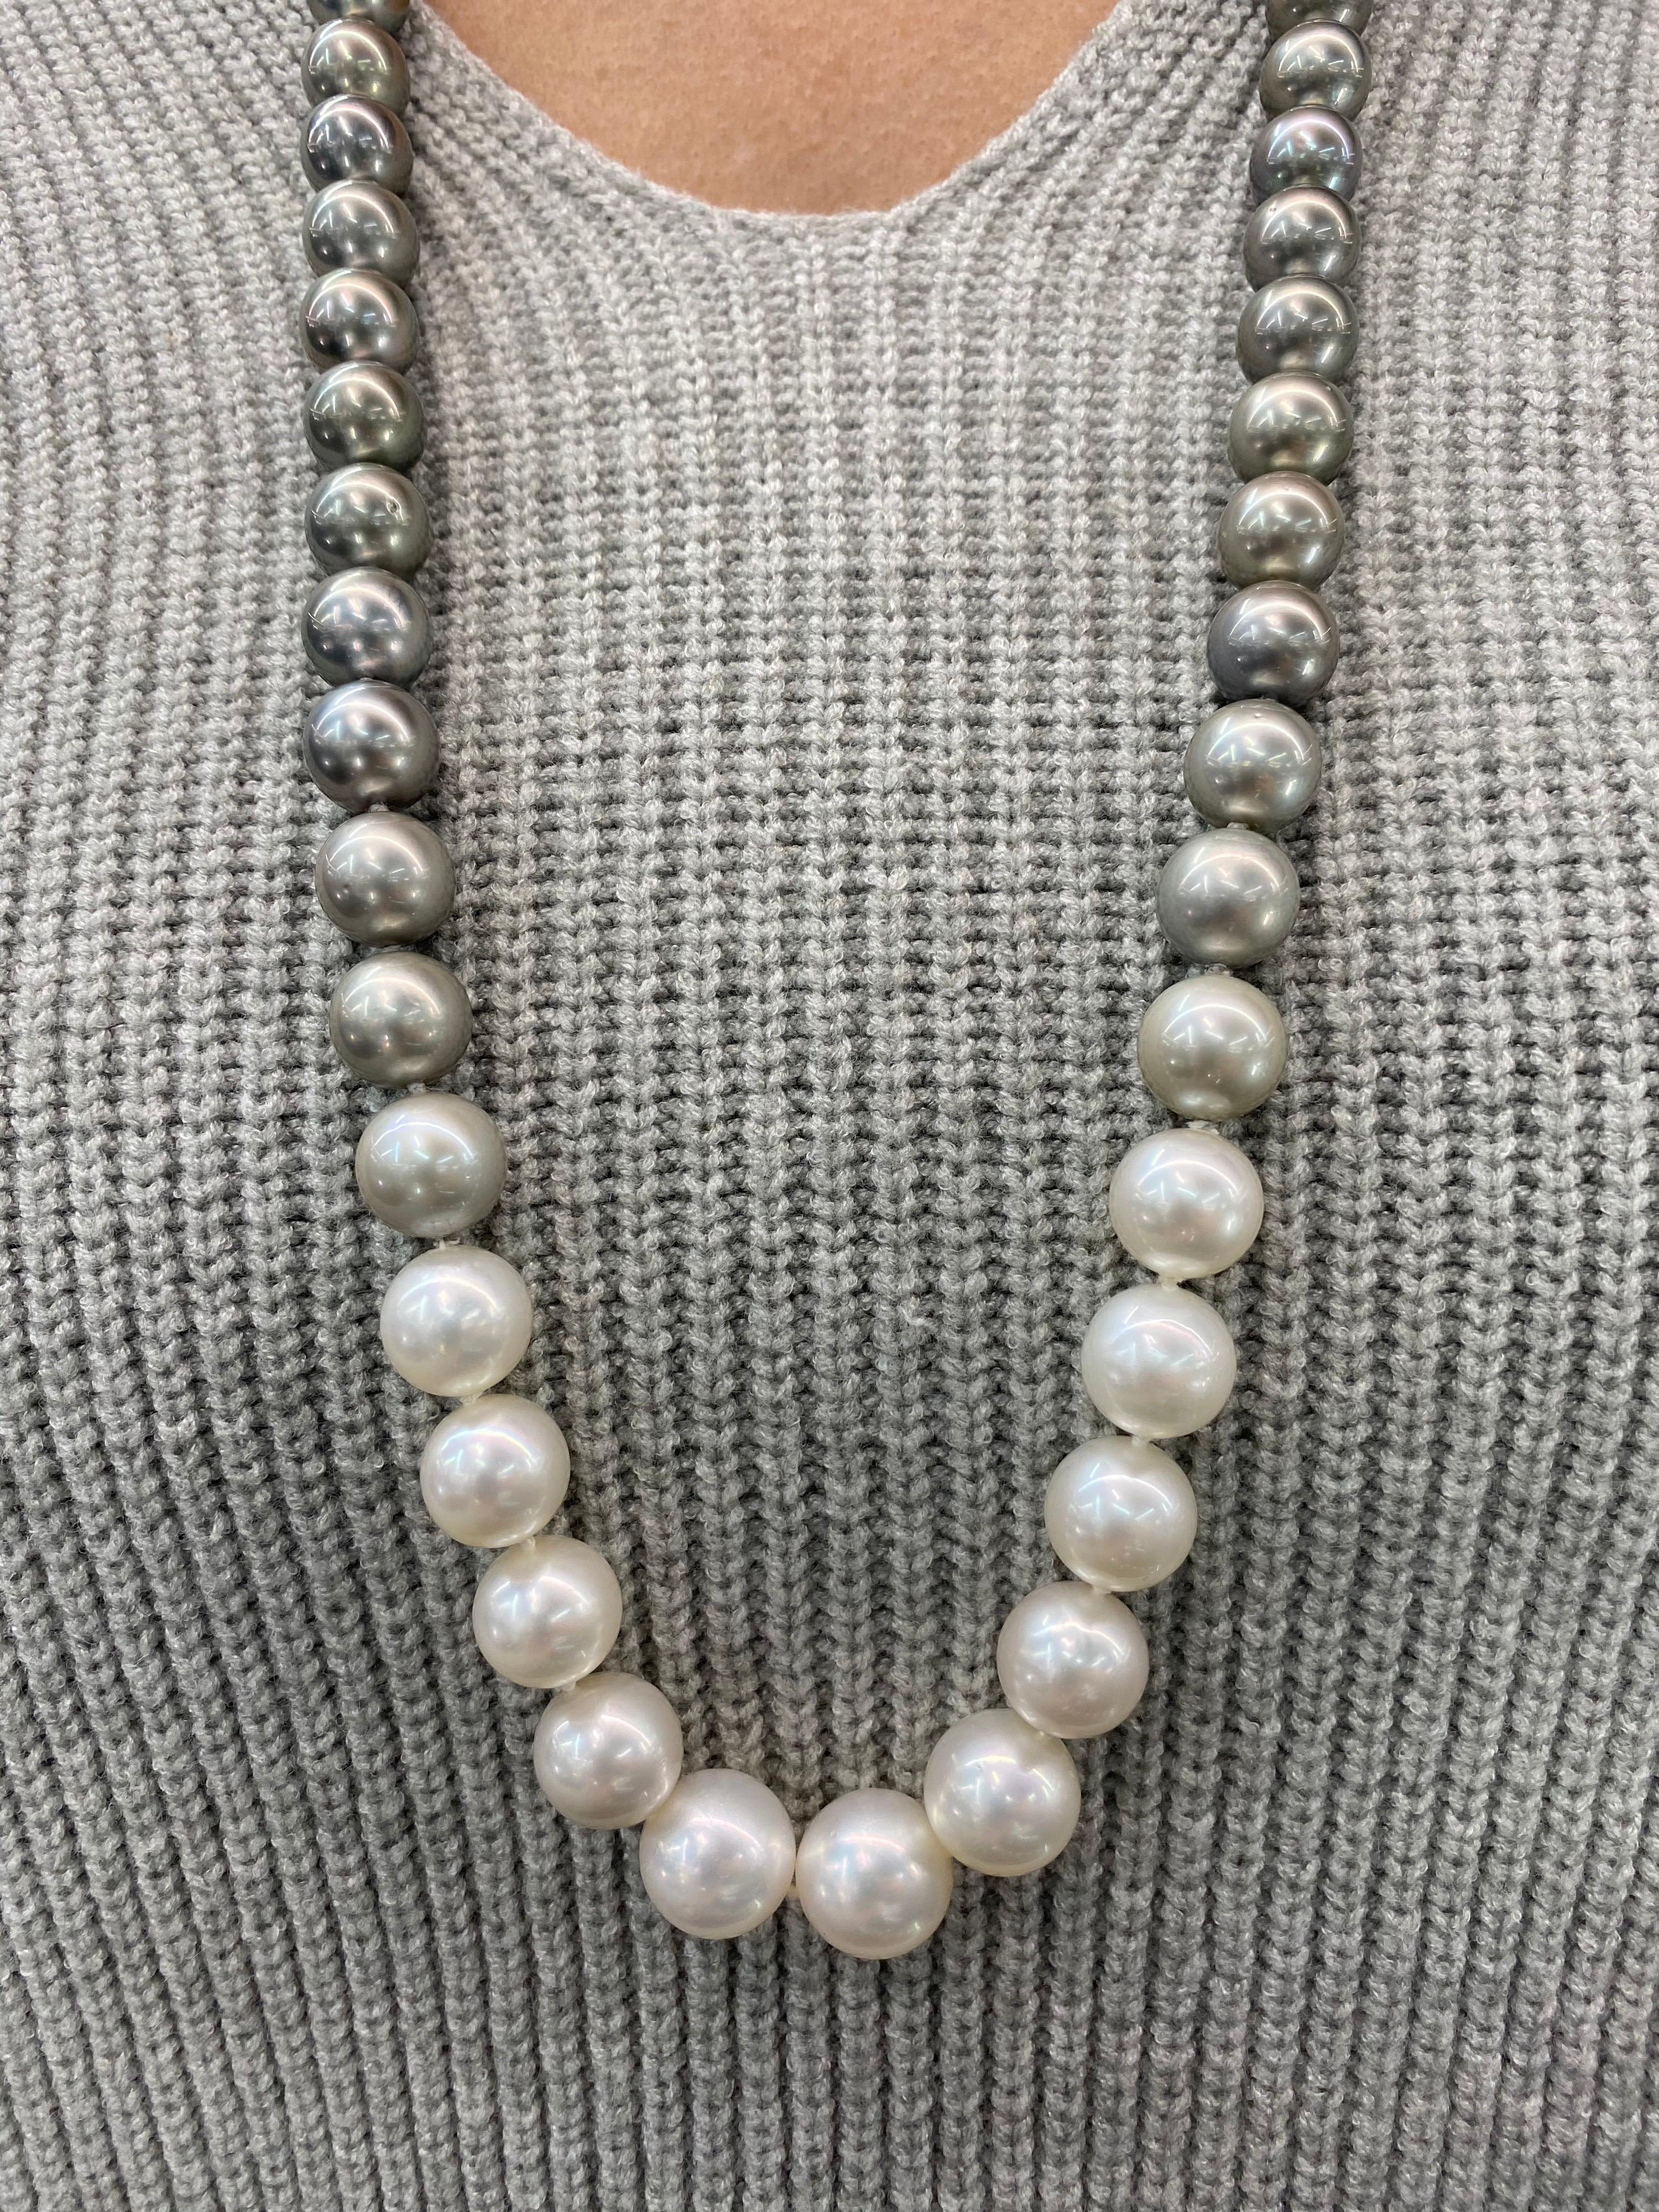 HARBOR D. Opera Ombre South Sea and Tahitian Pearl Necklace Diamond Clasp 3